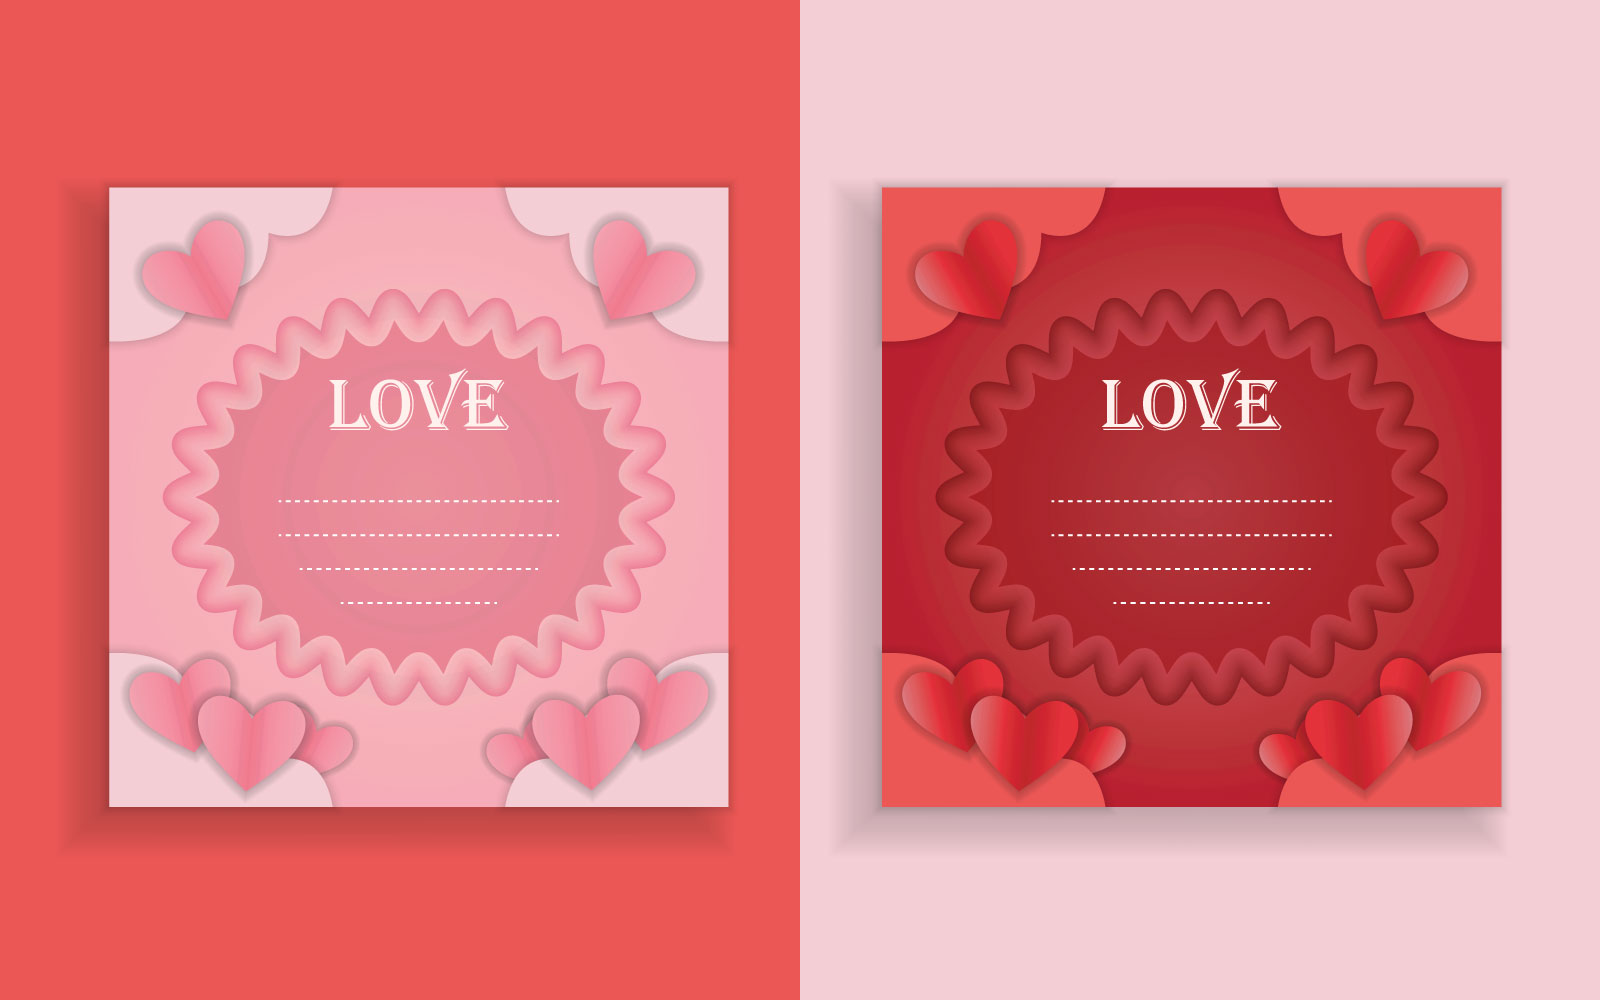 Shiny red and pink love greeting cards with hearts illustration